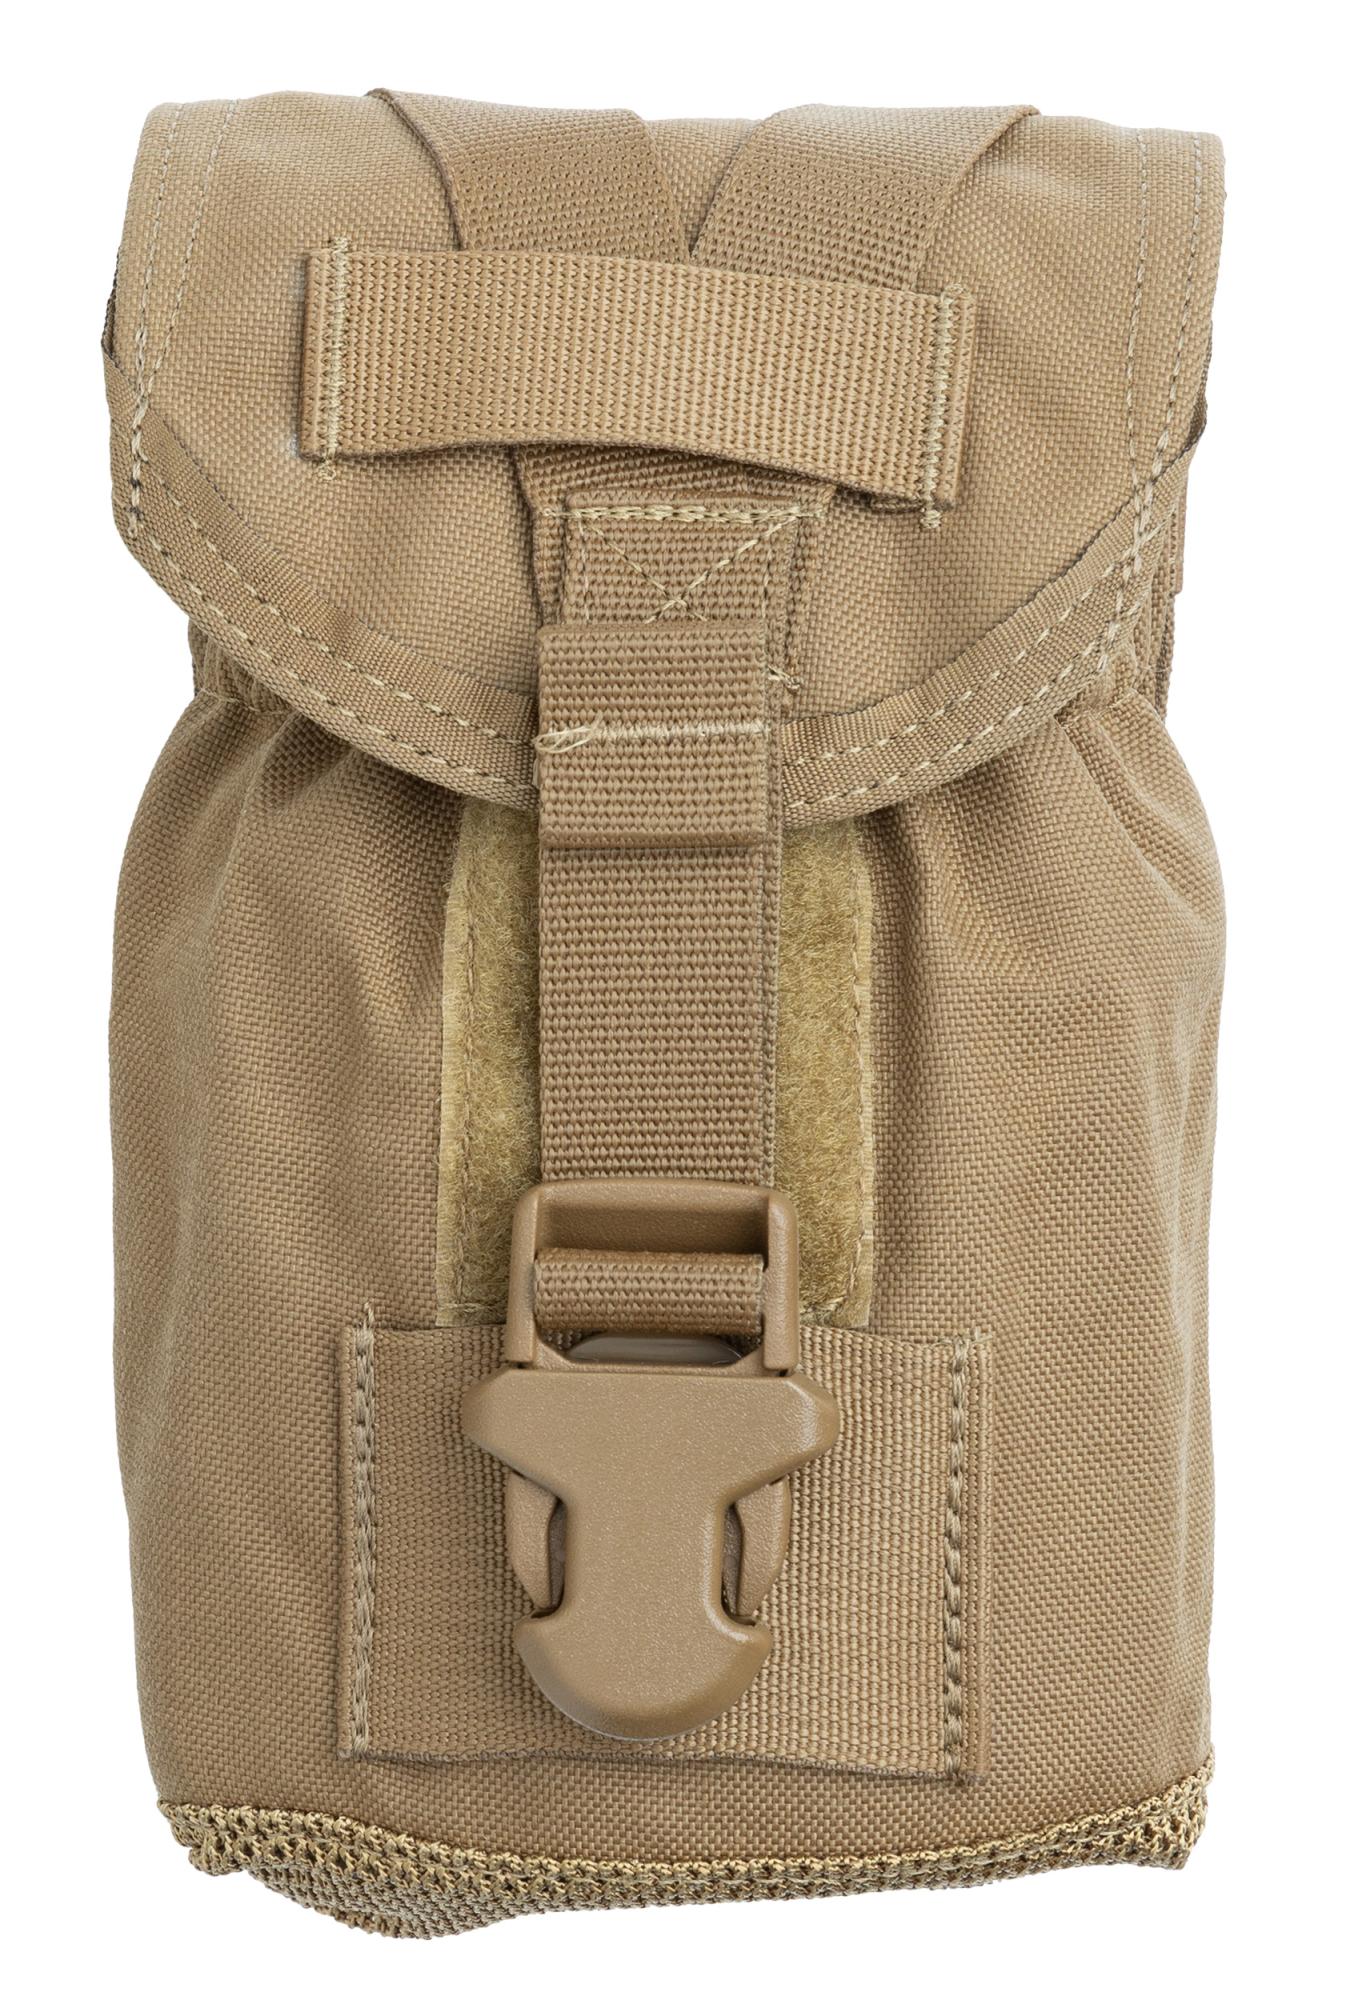 https://www.varusteleka.com/pictures/thumbs2000/usmc_fsbe_canteen_pouch_coyote_brown_surplus-06504576767761.jpg